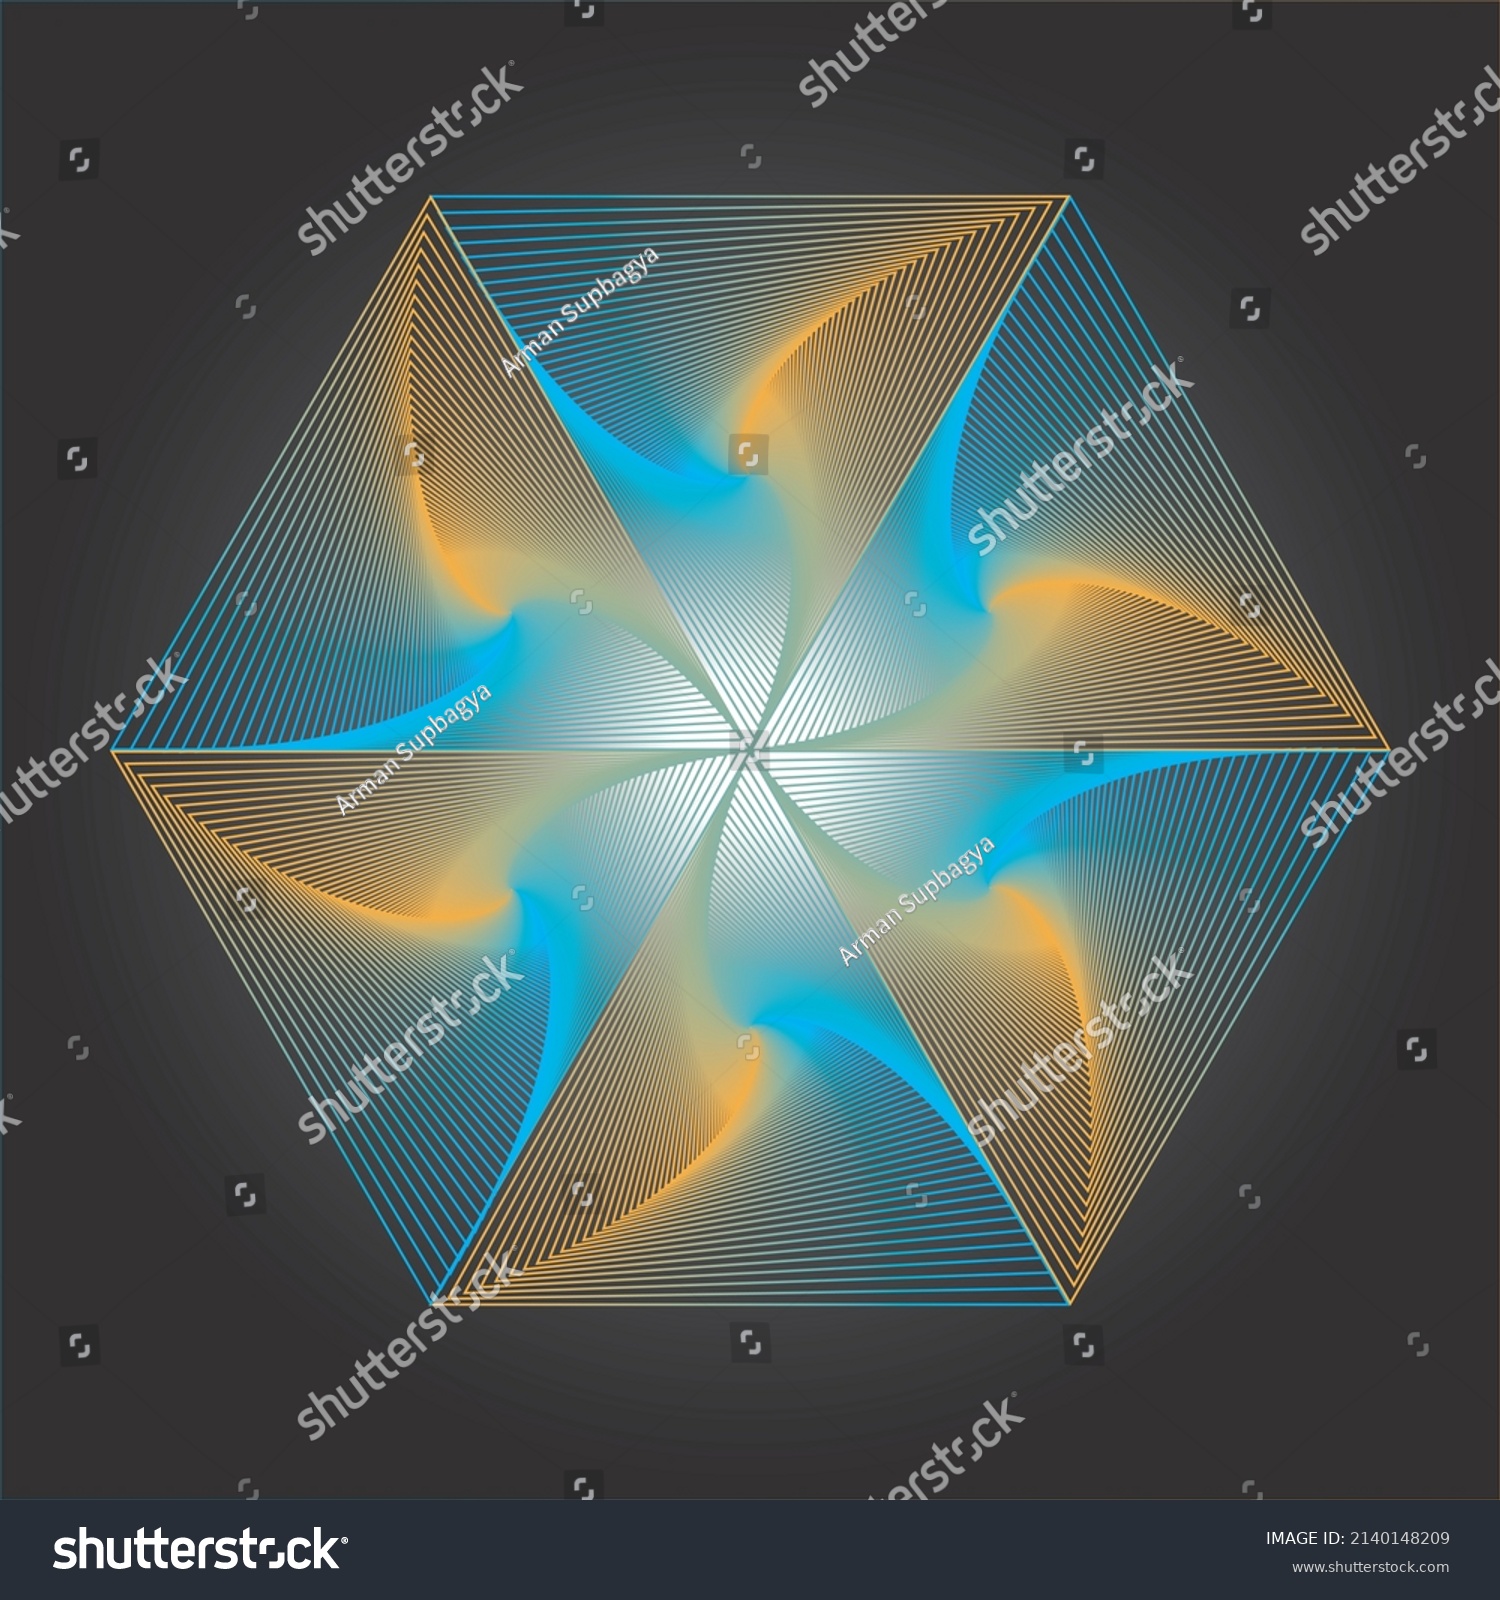 String Art Colorful Illustrator Background Stock Vector (Royalty Free ...